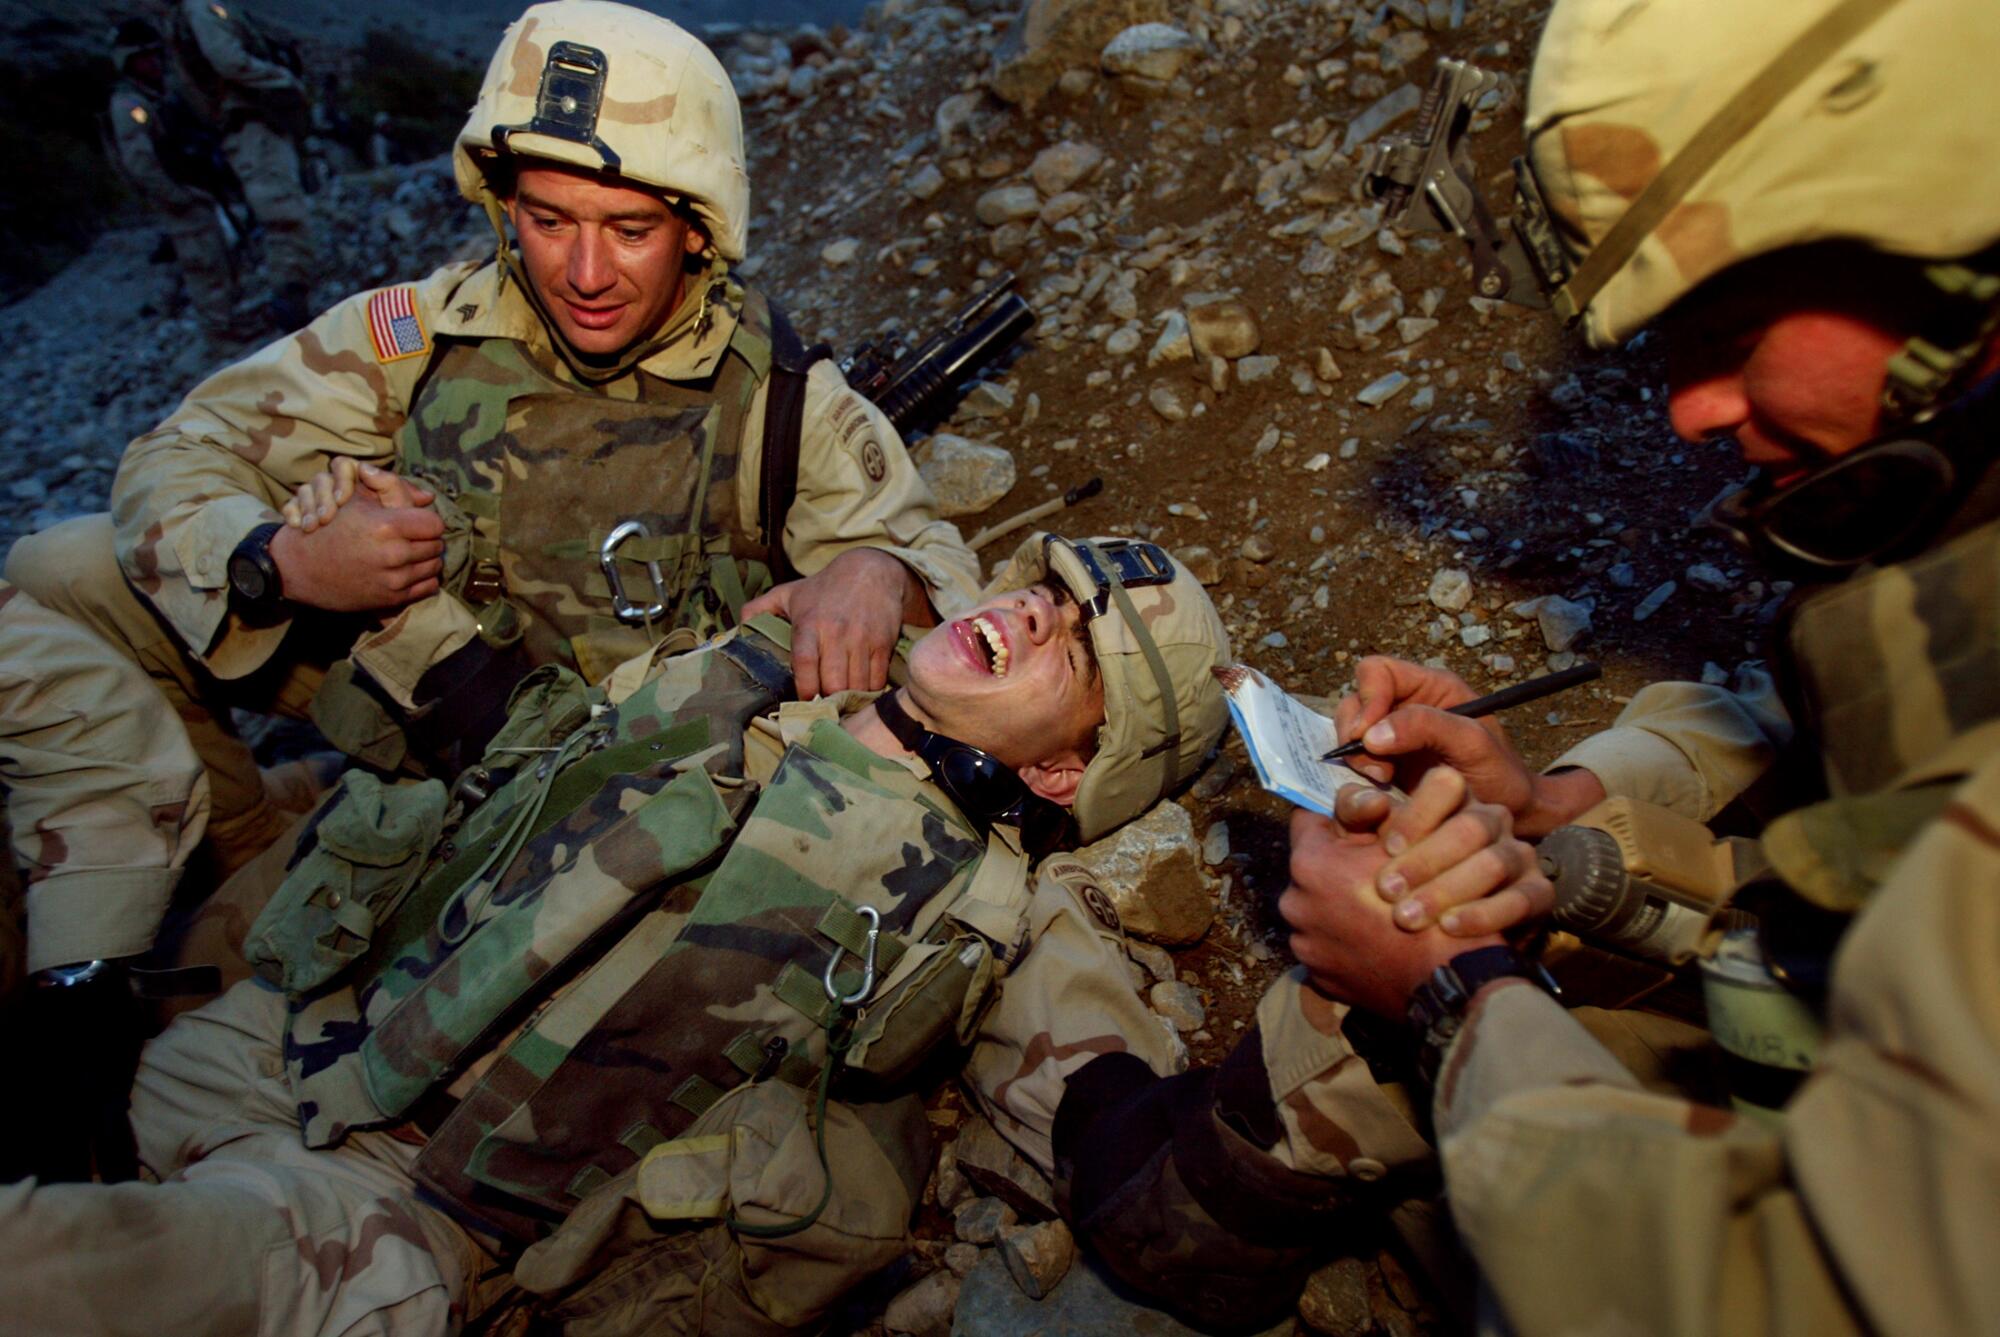 A soldier lies on the ground yelling as other soldiers tend to him